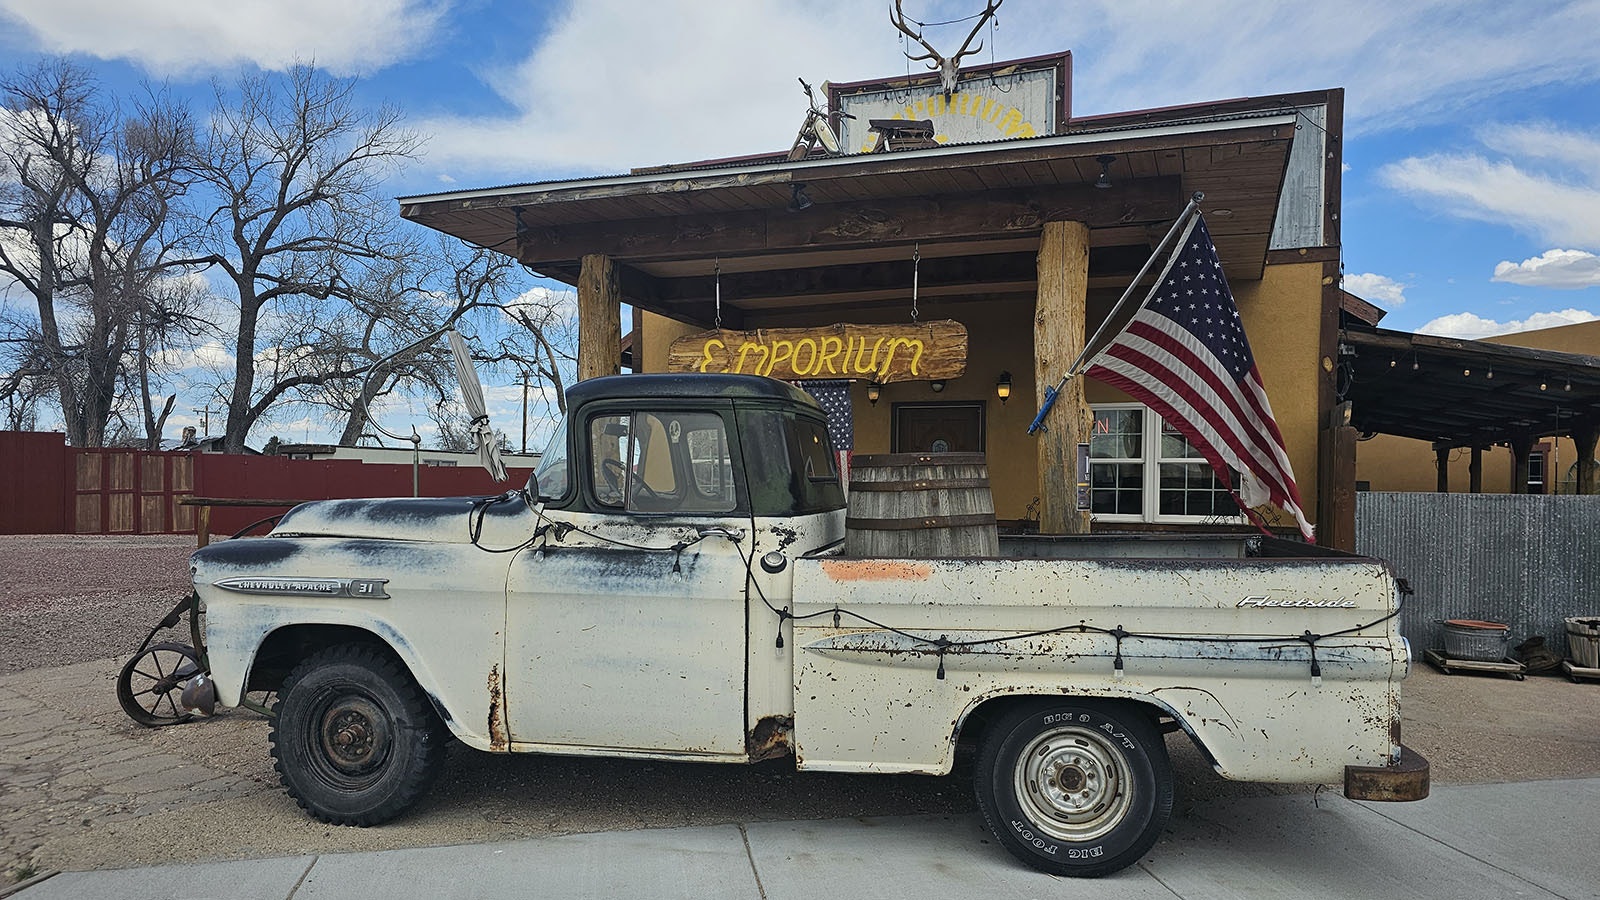 An old pickup truck with a beer keg in back is lighted up at night to draw attention to The Emporium.